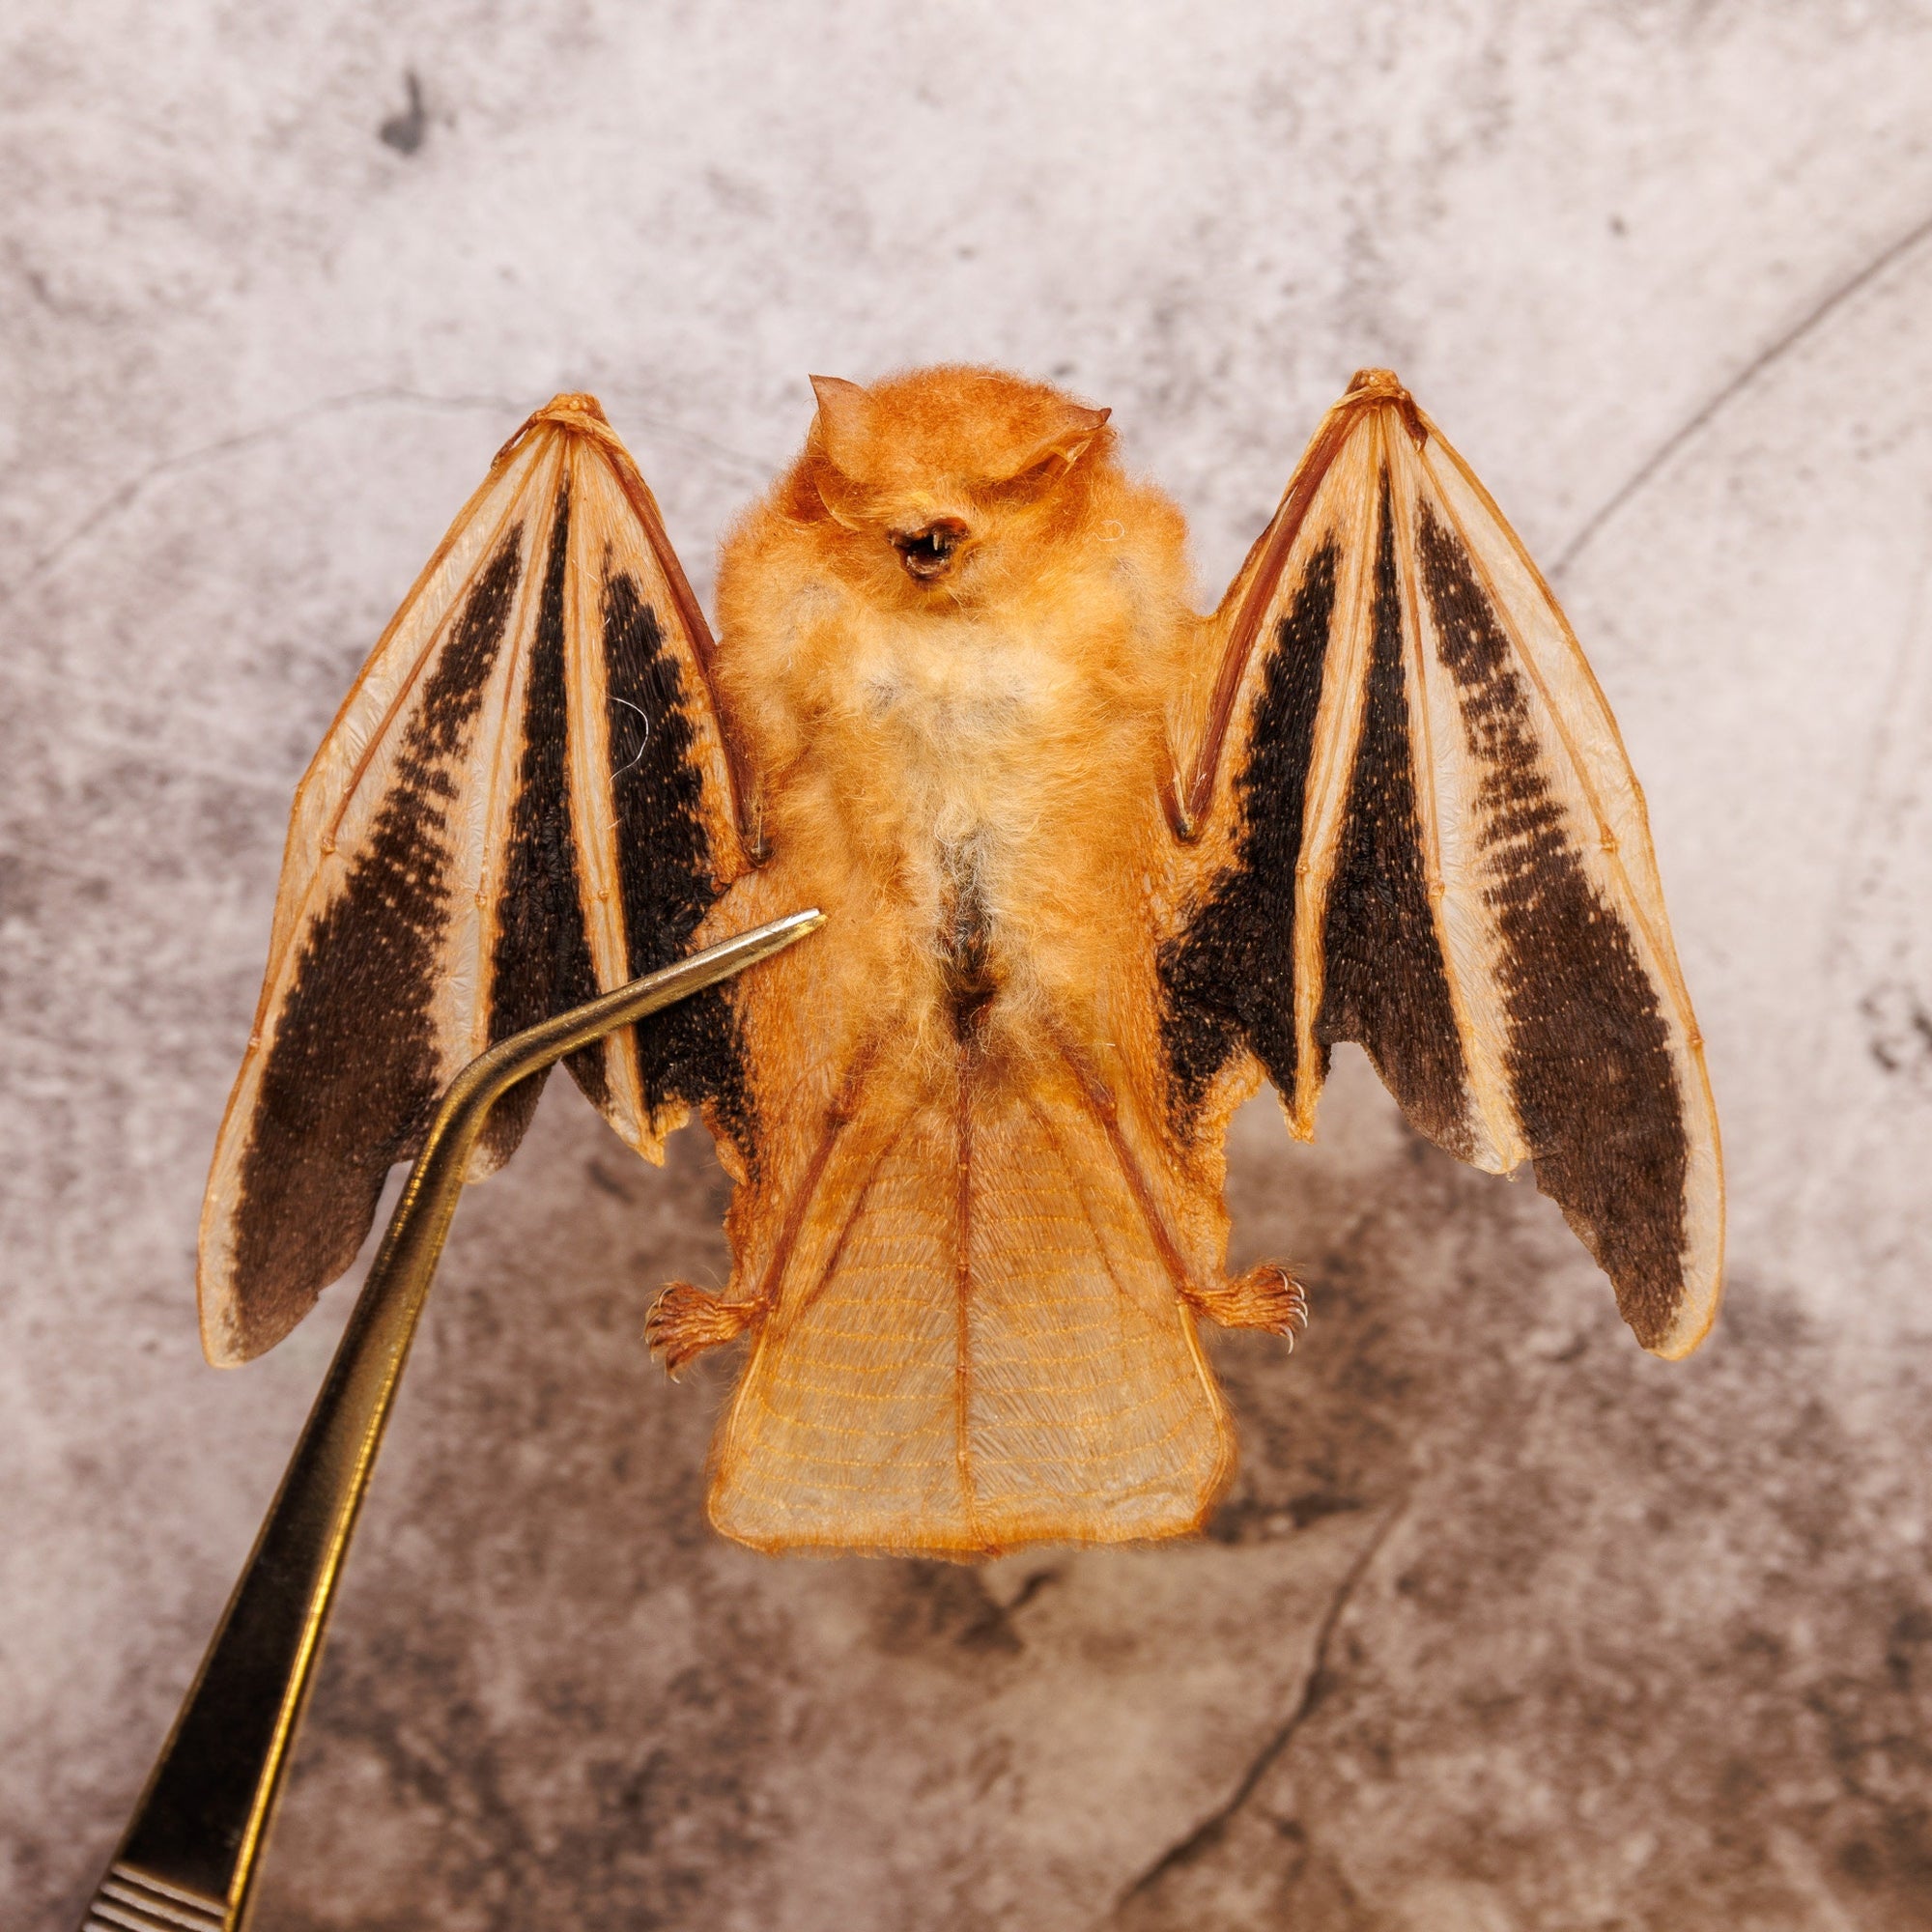 Fire Bat Folded Wings (Kerivoula picta) | 4 Inch Wingspan Dry-Preserved Taxidermy (Non-CITES)